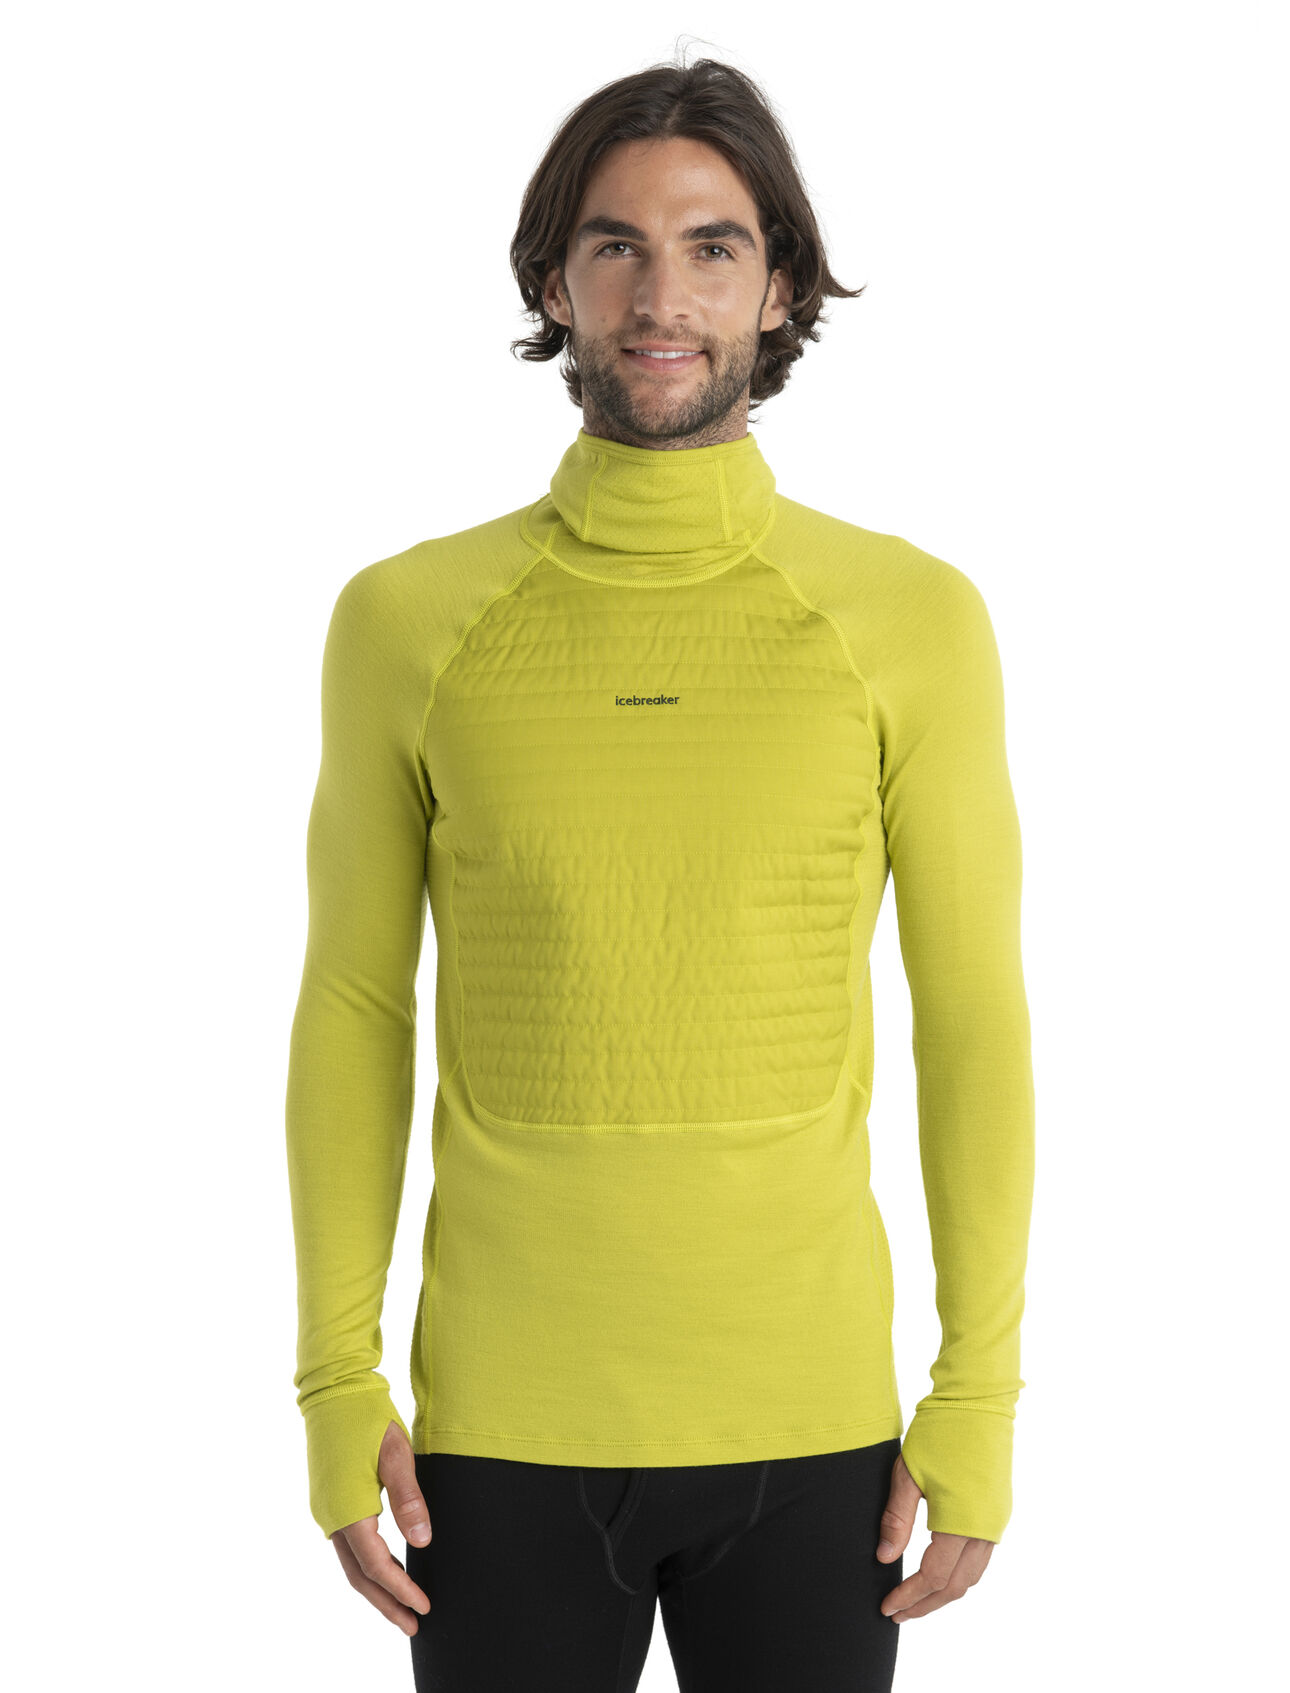 Mens ZoneKnit™ Merino Insulated Long Sleeve Thermal Hoodie A high-performance merino wool base layer optimized for intense activity and technical mountain pursuits, the ZoneKnit™ Insulated Long Sleeve Hoodie combines our ZoneKnit engineered body-mapping with quilted MerinoLoft™ insulation at the chest for added warmth.